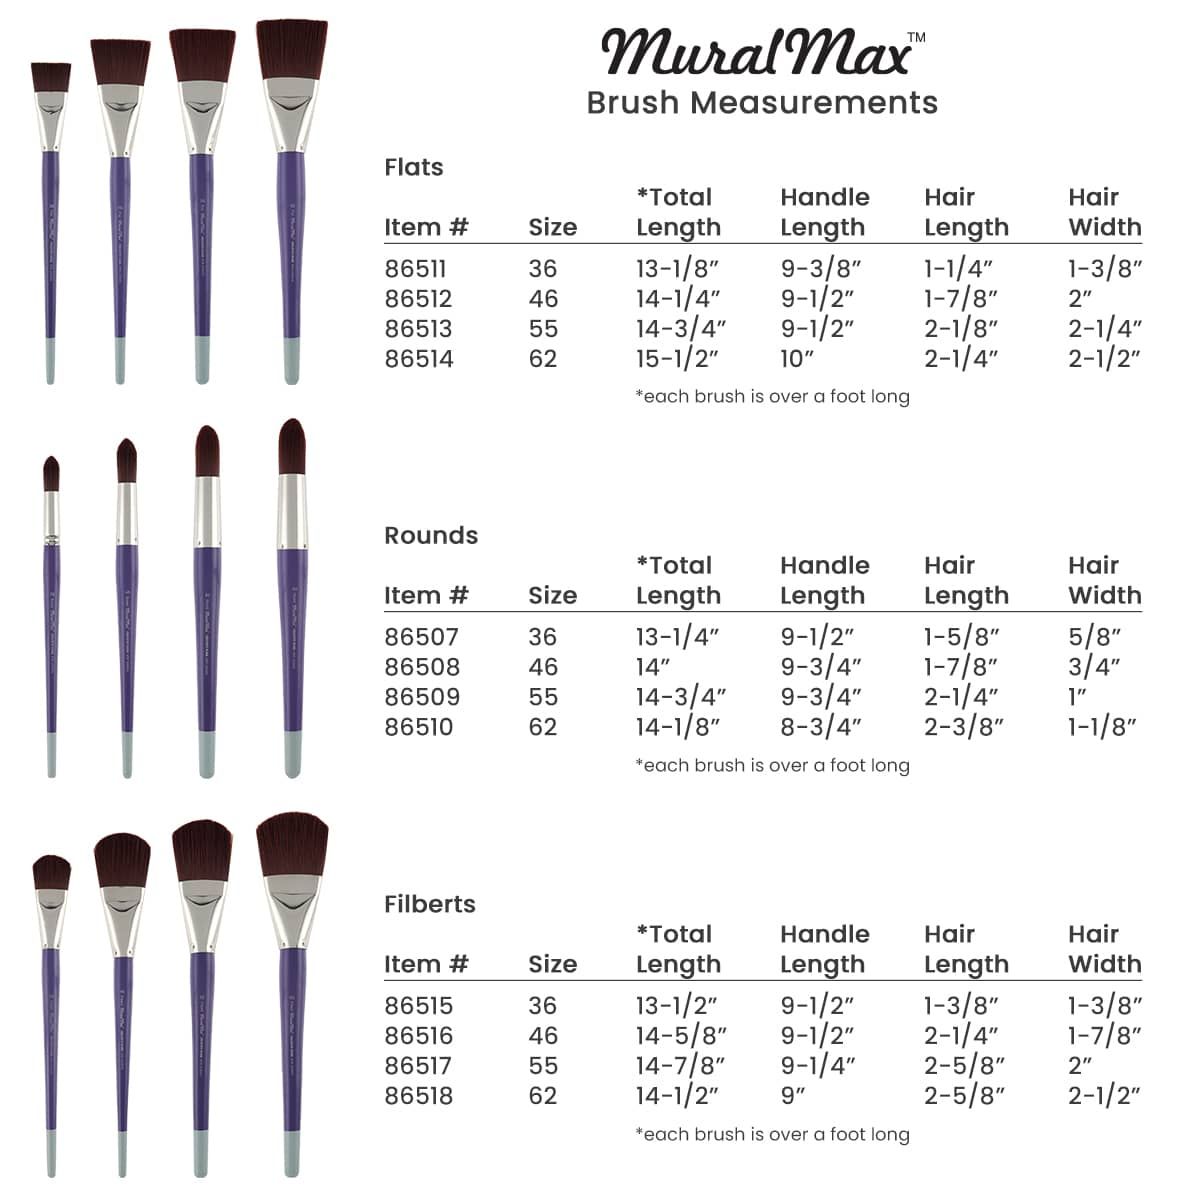 Multi-diameter synthetic hair brushes in Flats, Rounds, and Filberts